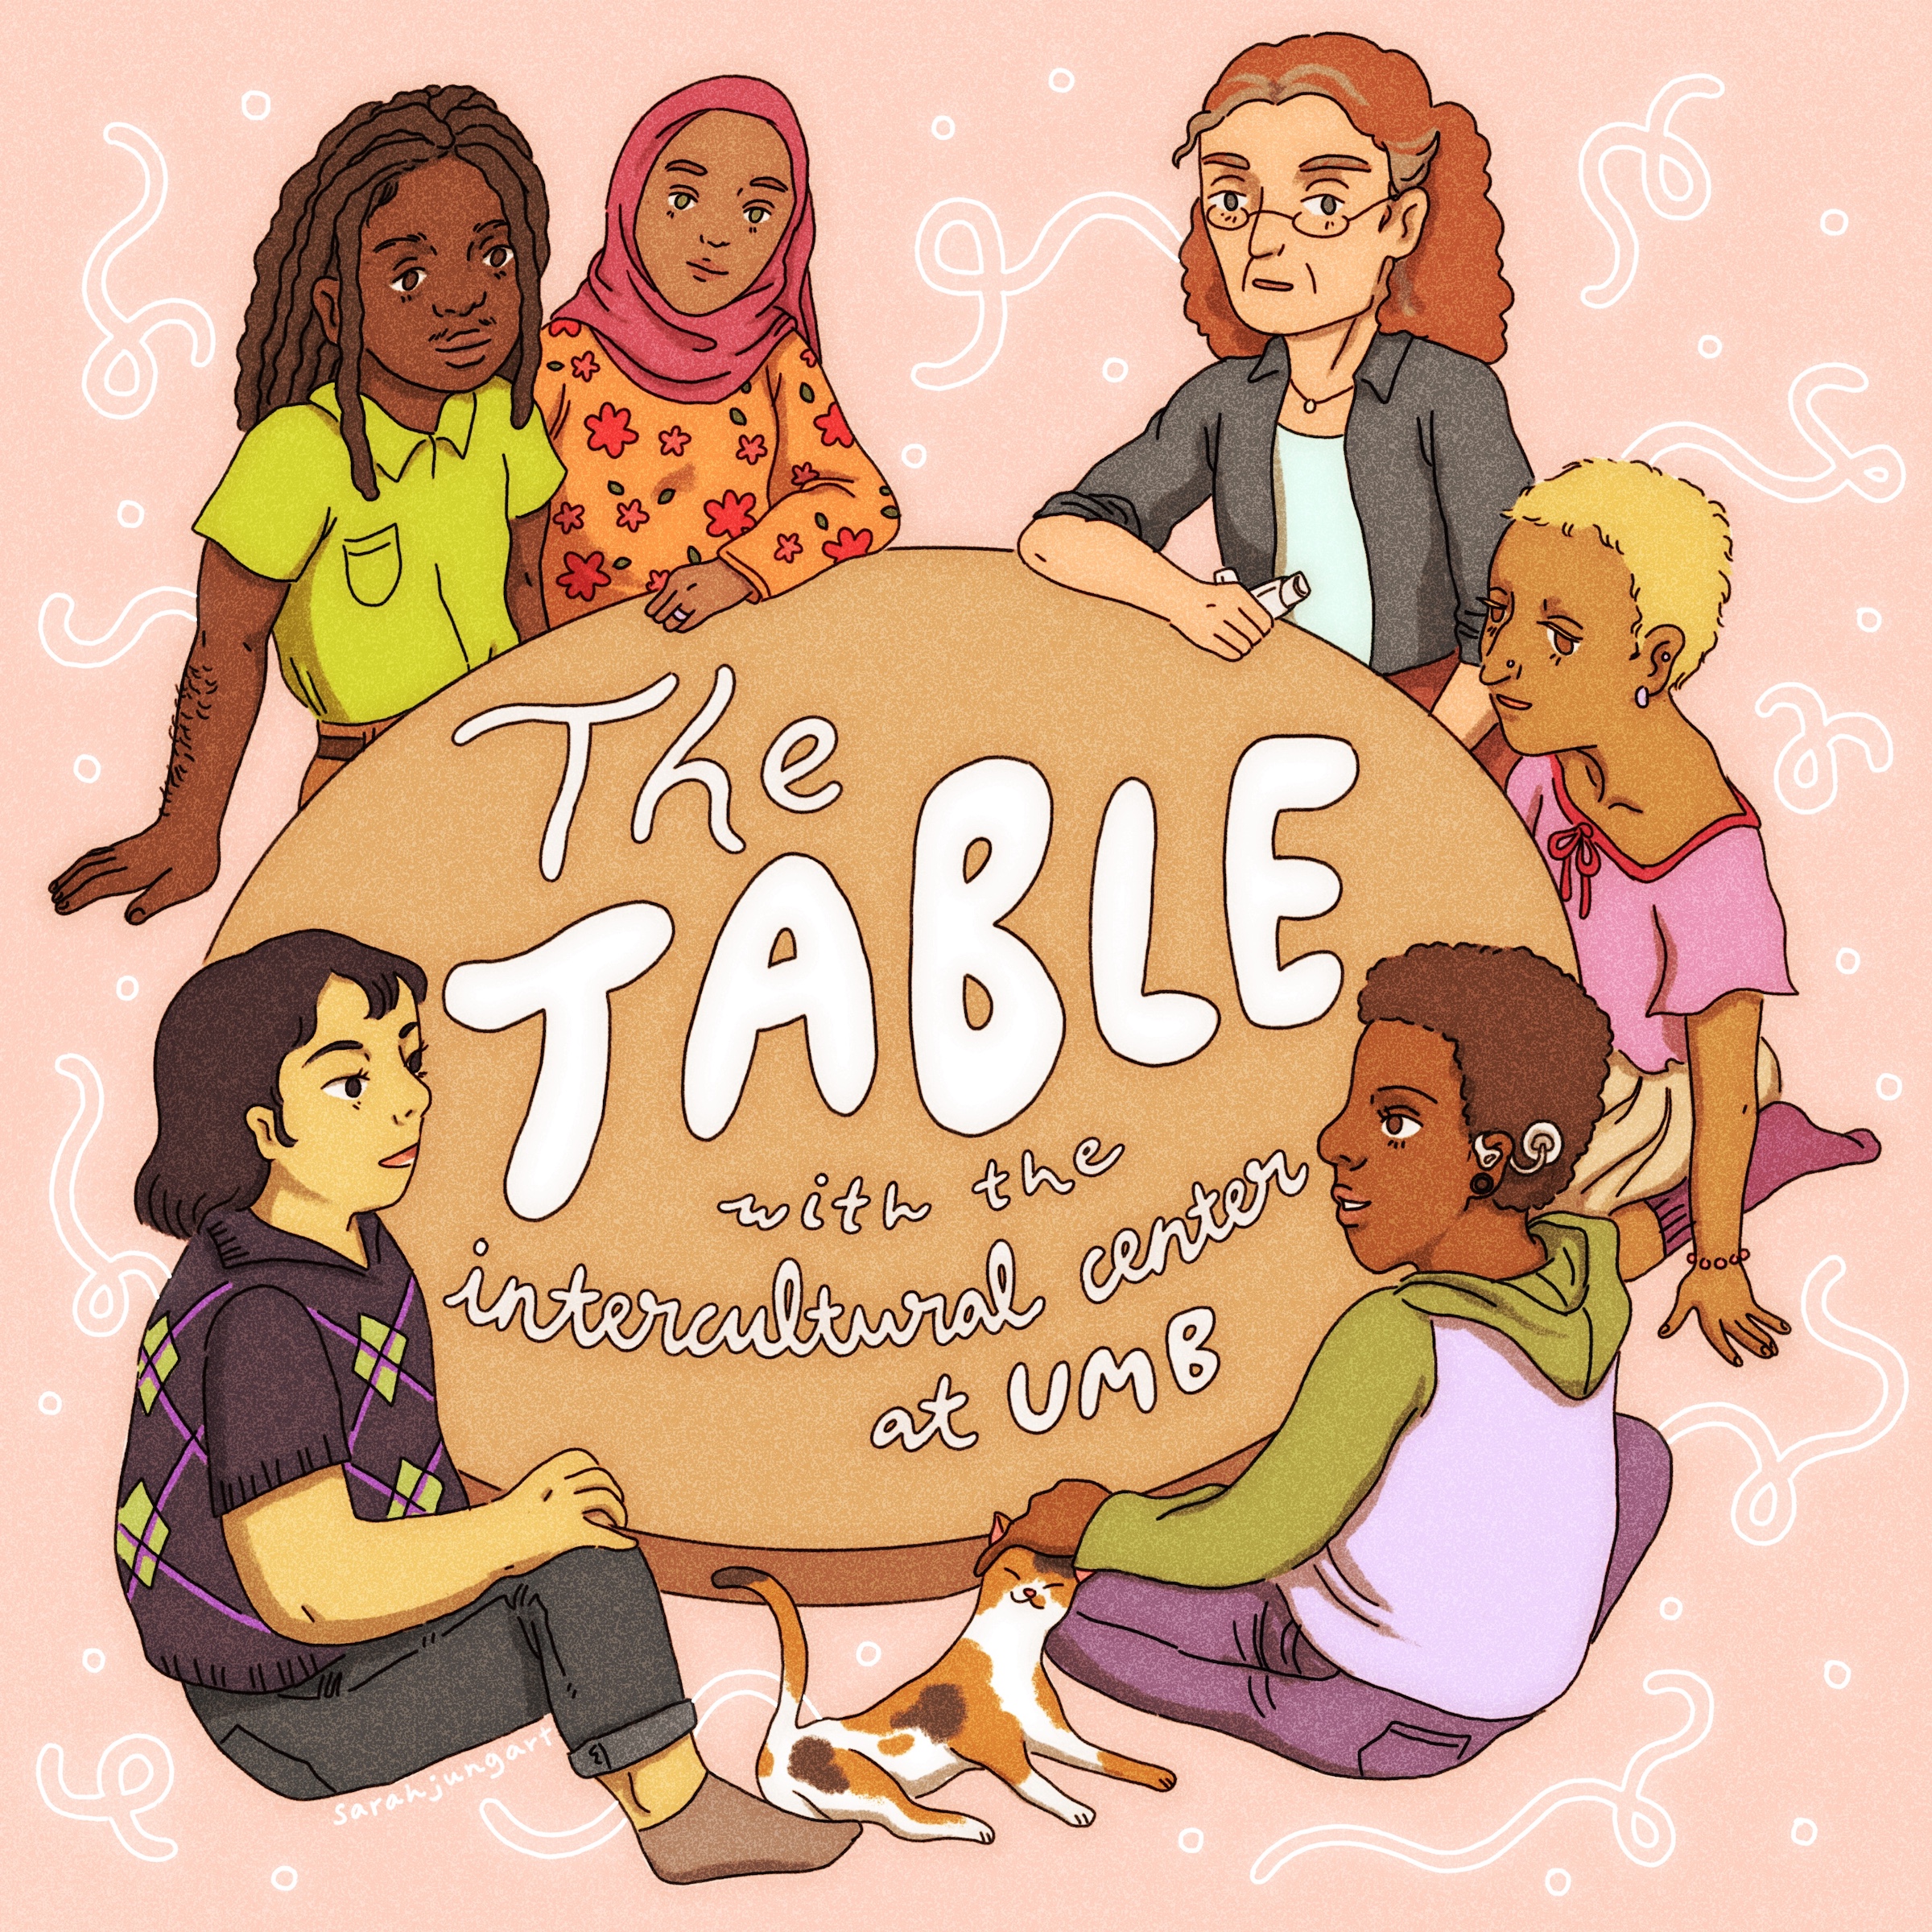 Six individuals of various social identities such as race, ability, age, and religion, sit around a table that has the words The Table with the Intercultural Center at UMB written in the middle.